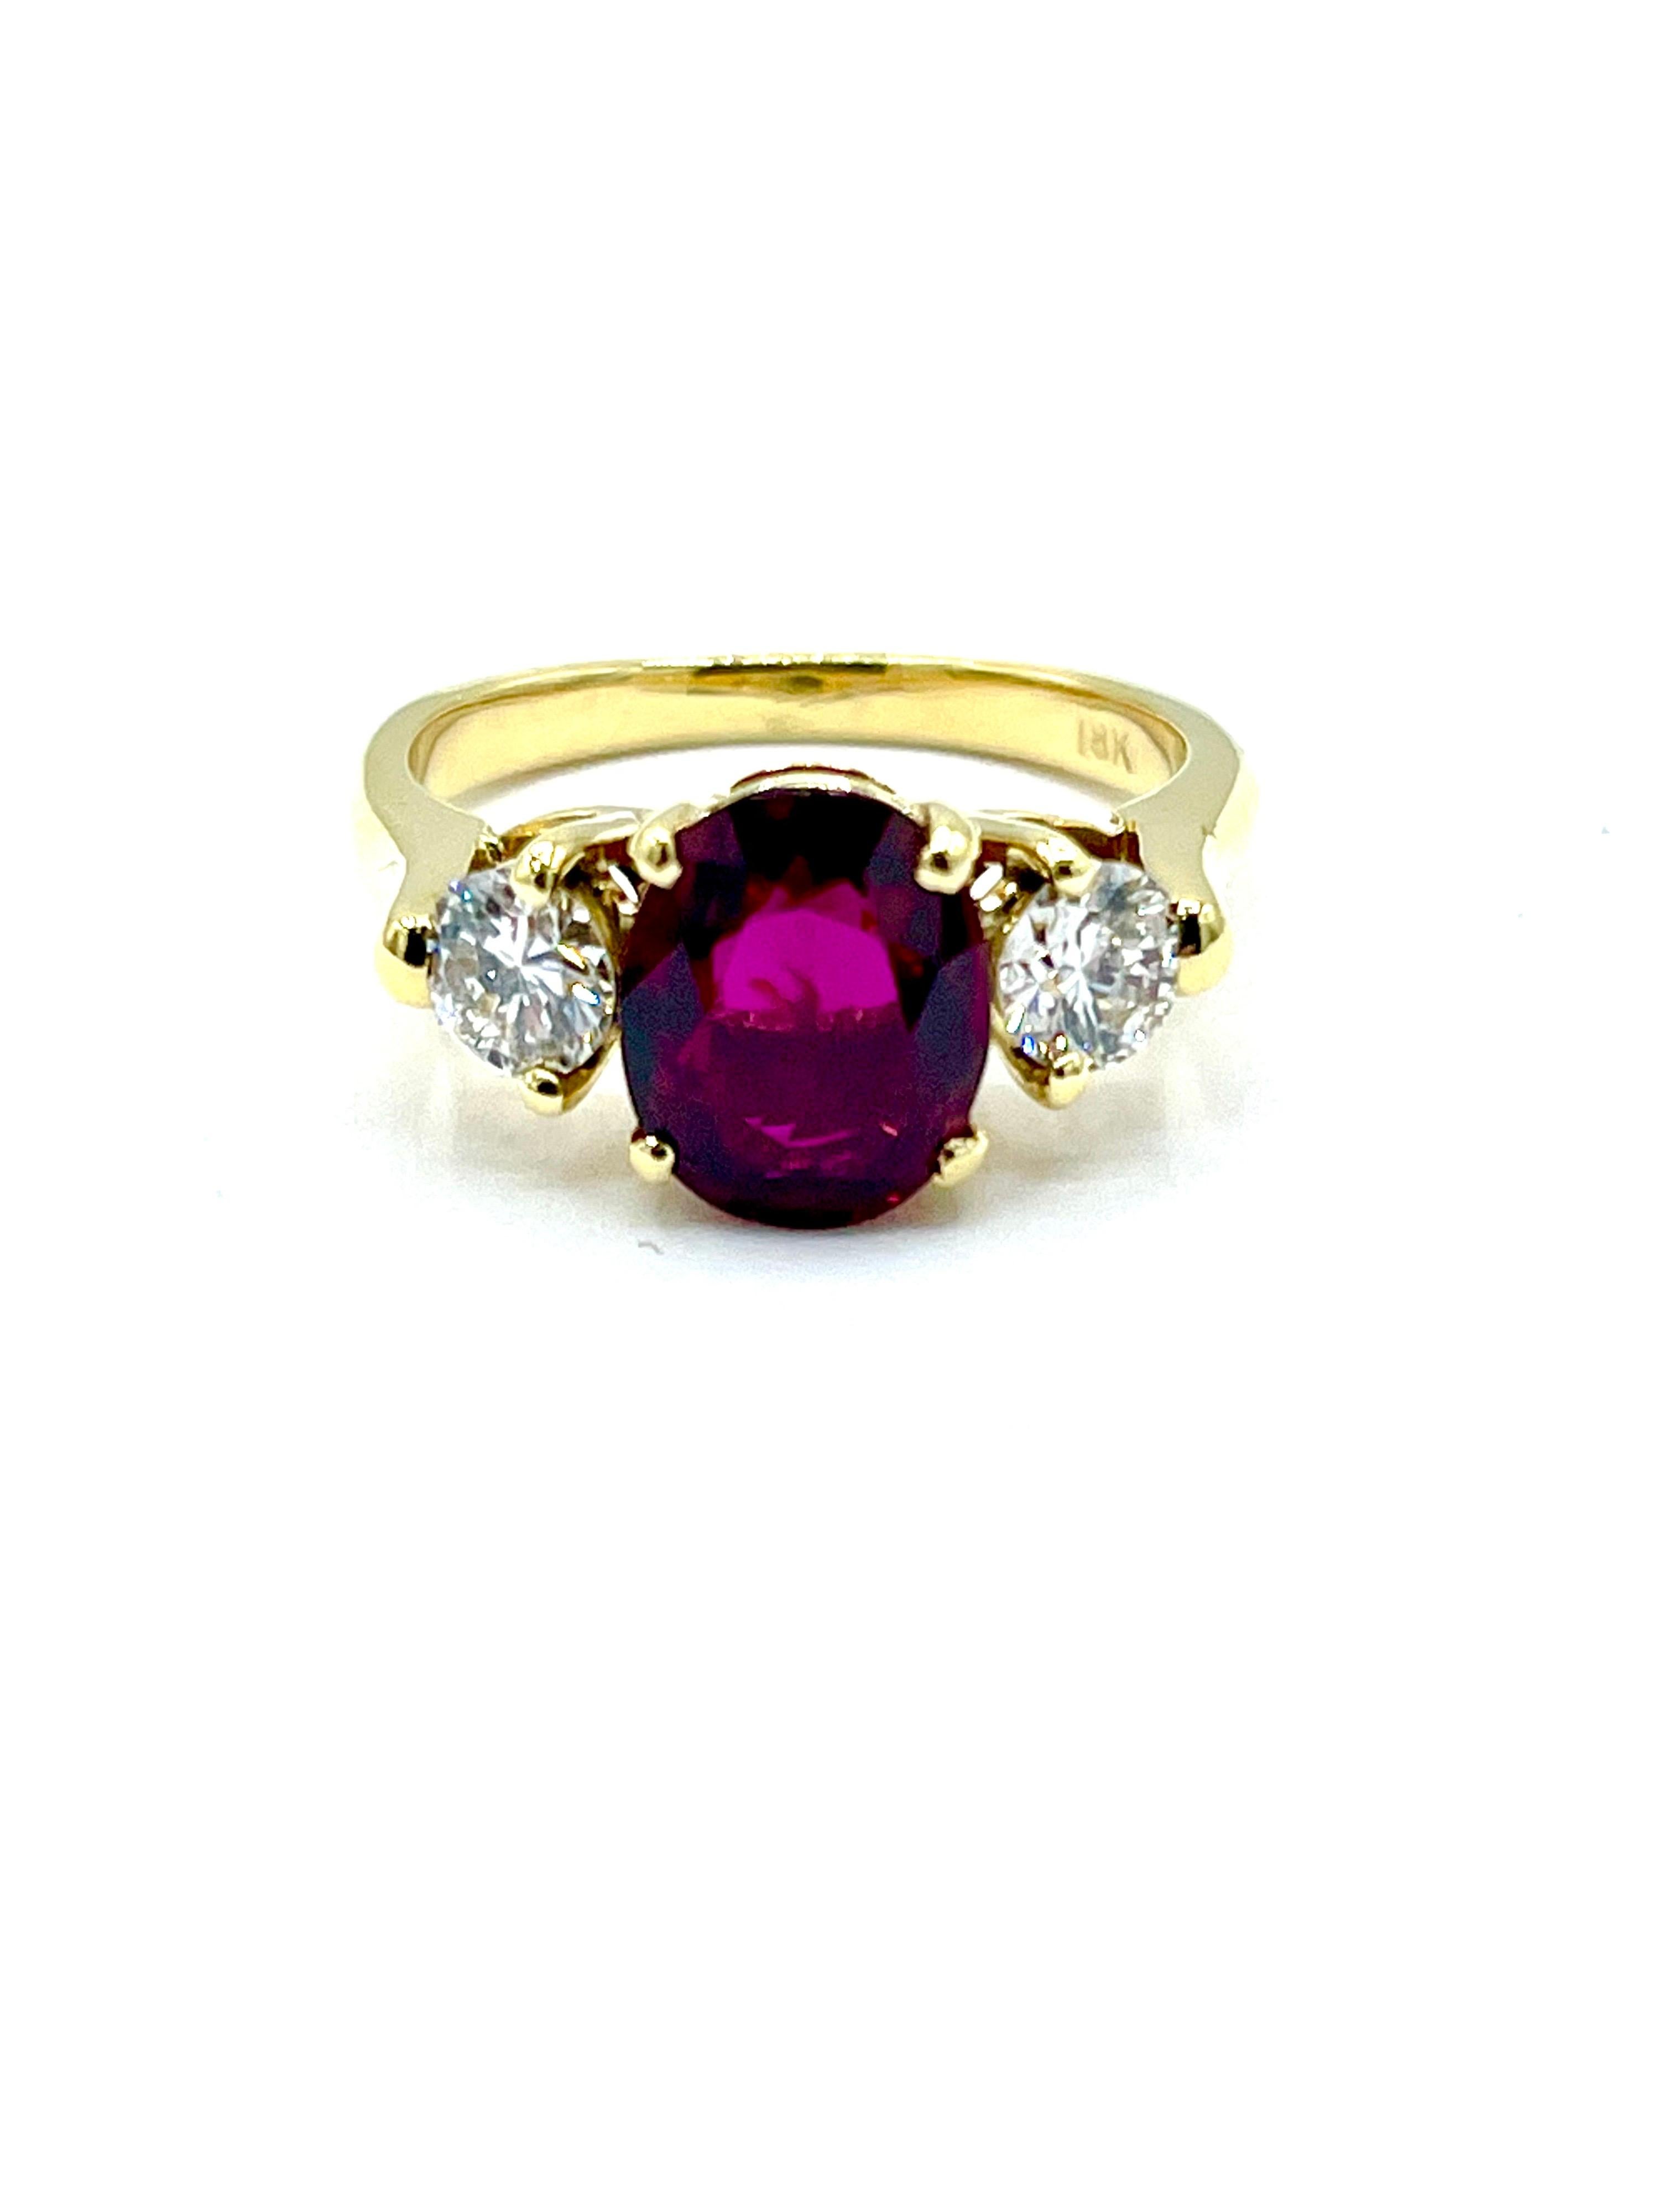 A gorgeous Ruby and Diamond ring!  The 2.14 carat crimson red Ruby is set in a four prong basket mounting, with a single round brilliant Diamond on each side.  The shoulders of the shank come up from the shank to act as the outside third prong.  The